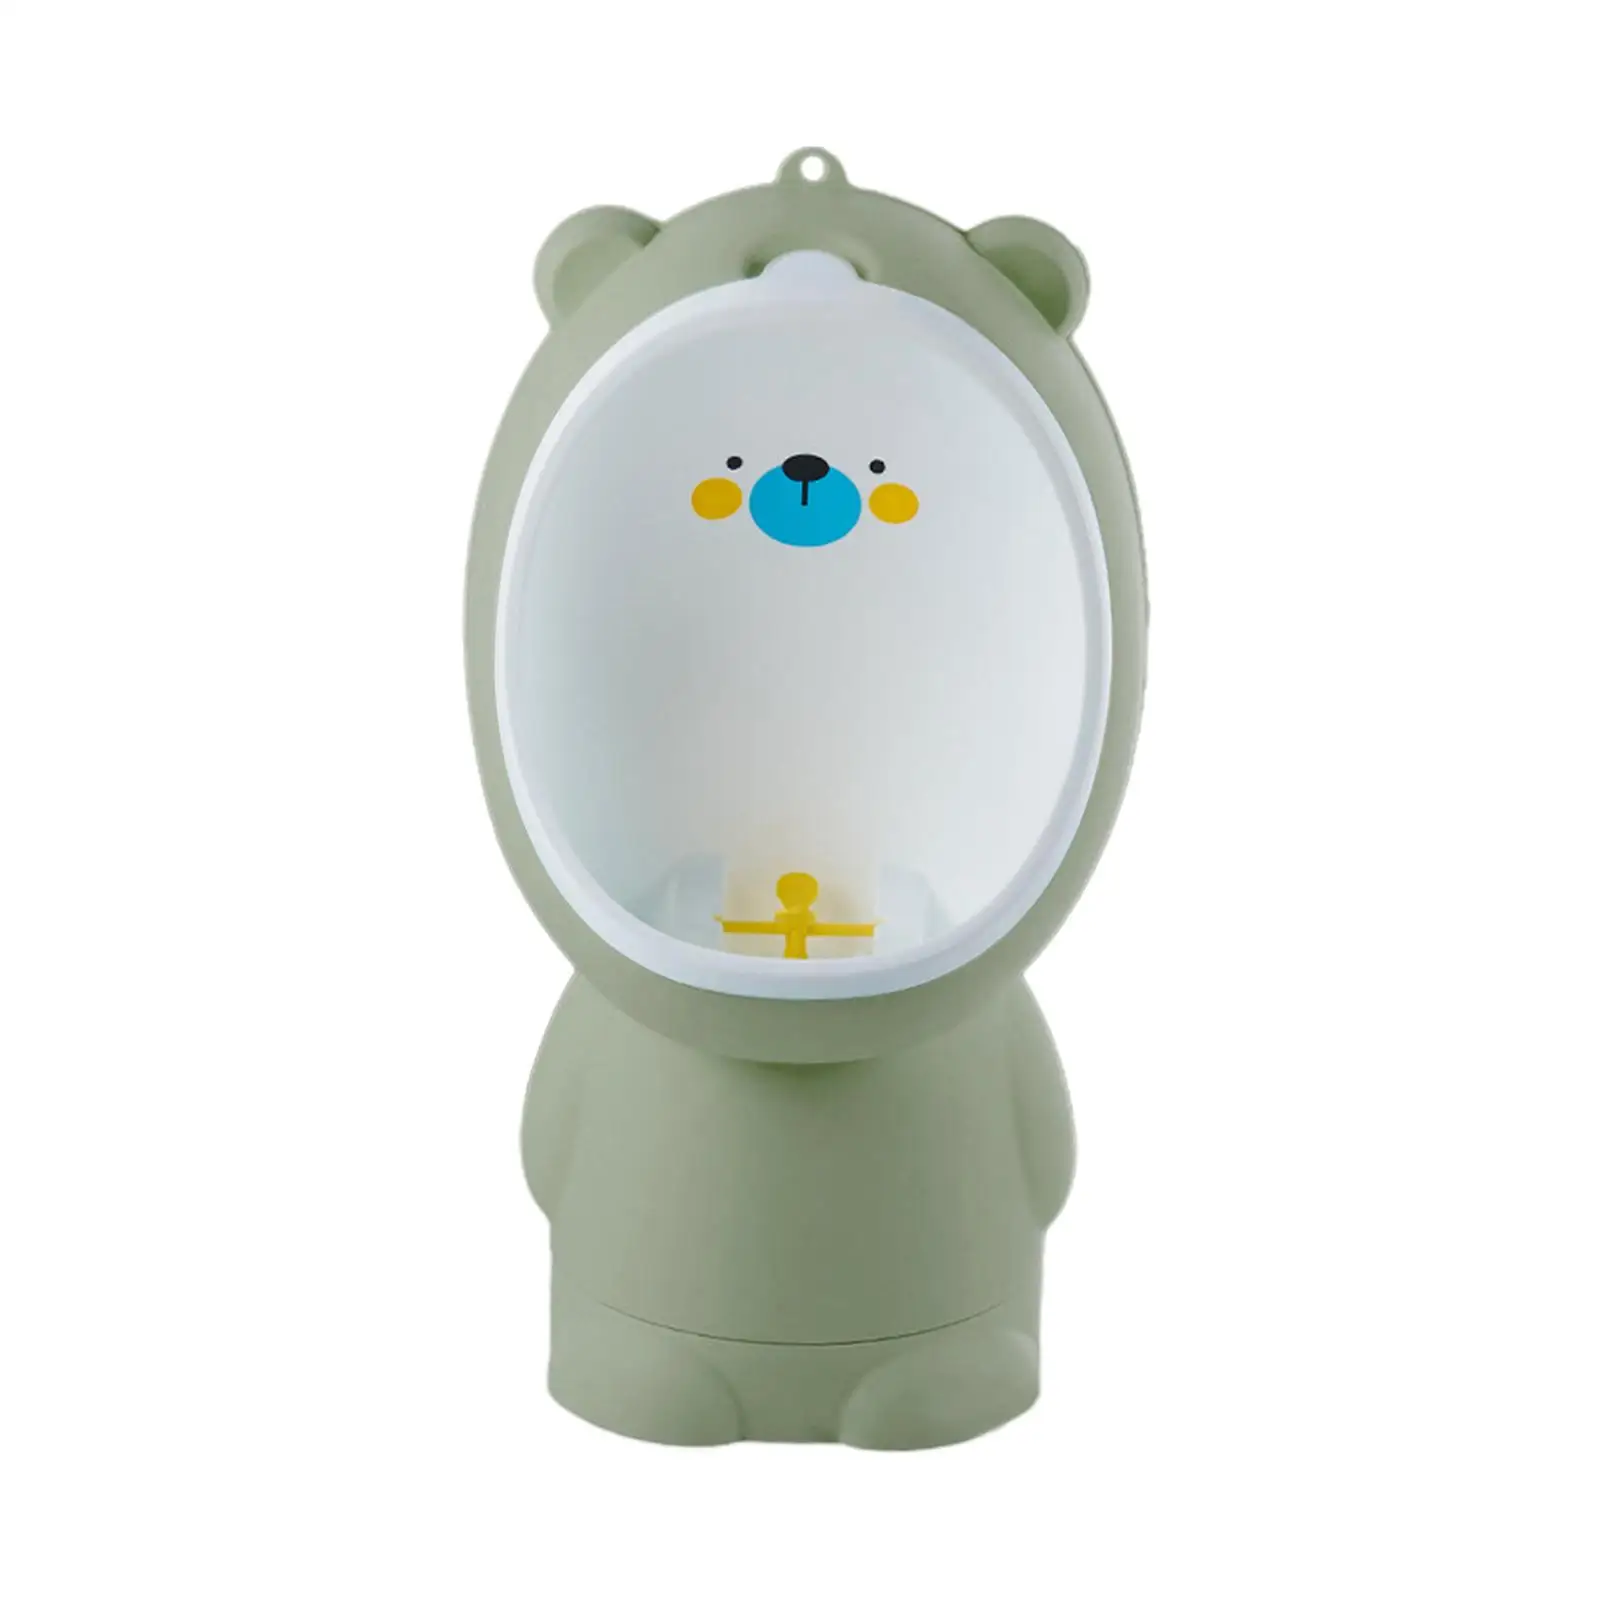 Potty Trainer Urinal Wall Mounted Children Stand Vertical Urinal Hanging Pee Trainer for Child Kids Boys Baby Toddlers